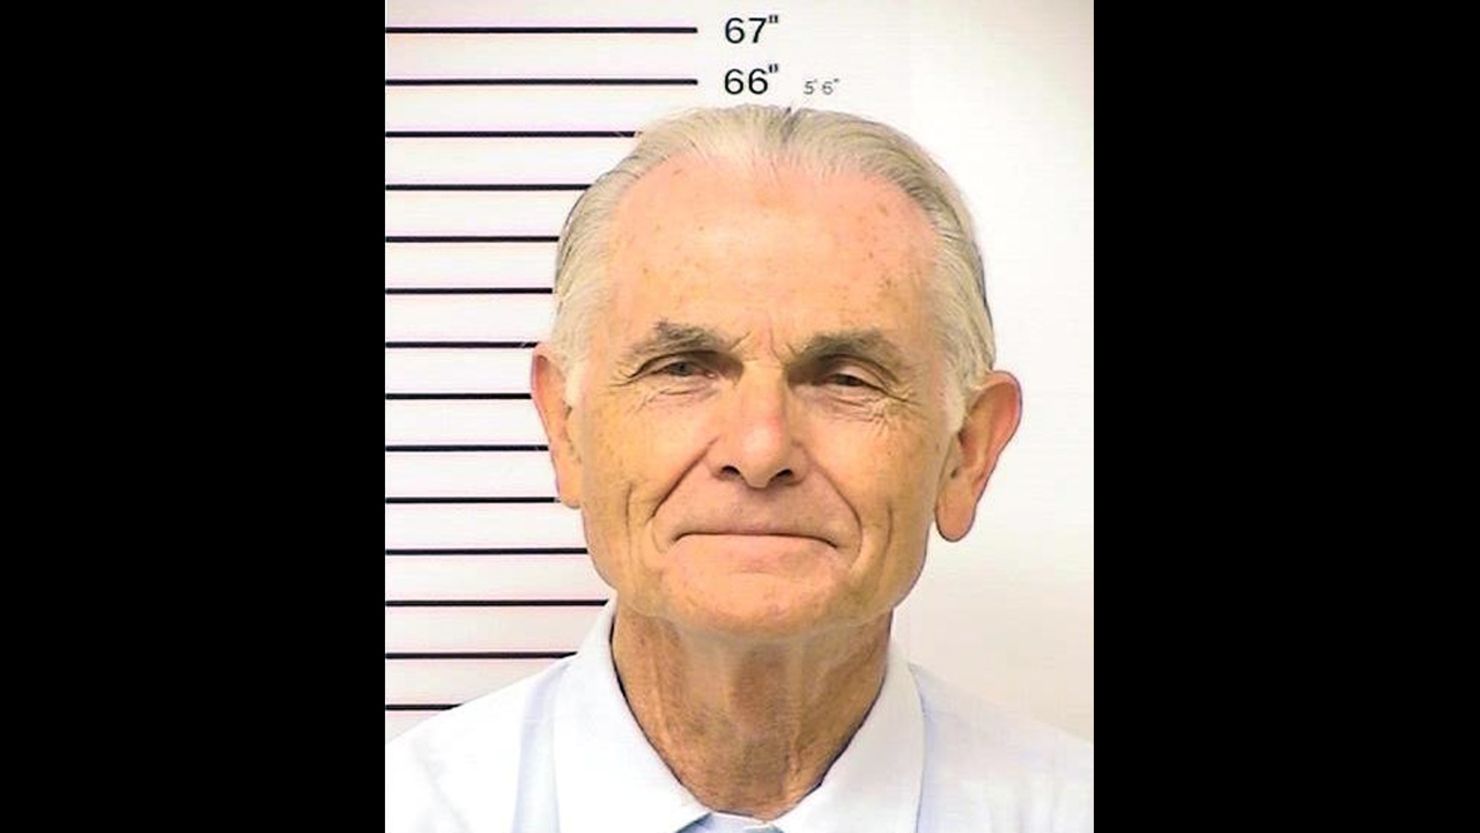 Charles Manson follower Bruce Davis is serving two life sentences for the slayings of musician Gary Hinman and stuntman Donald "Shorty" Shea.
